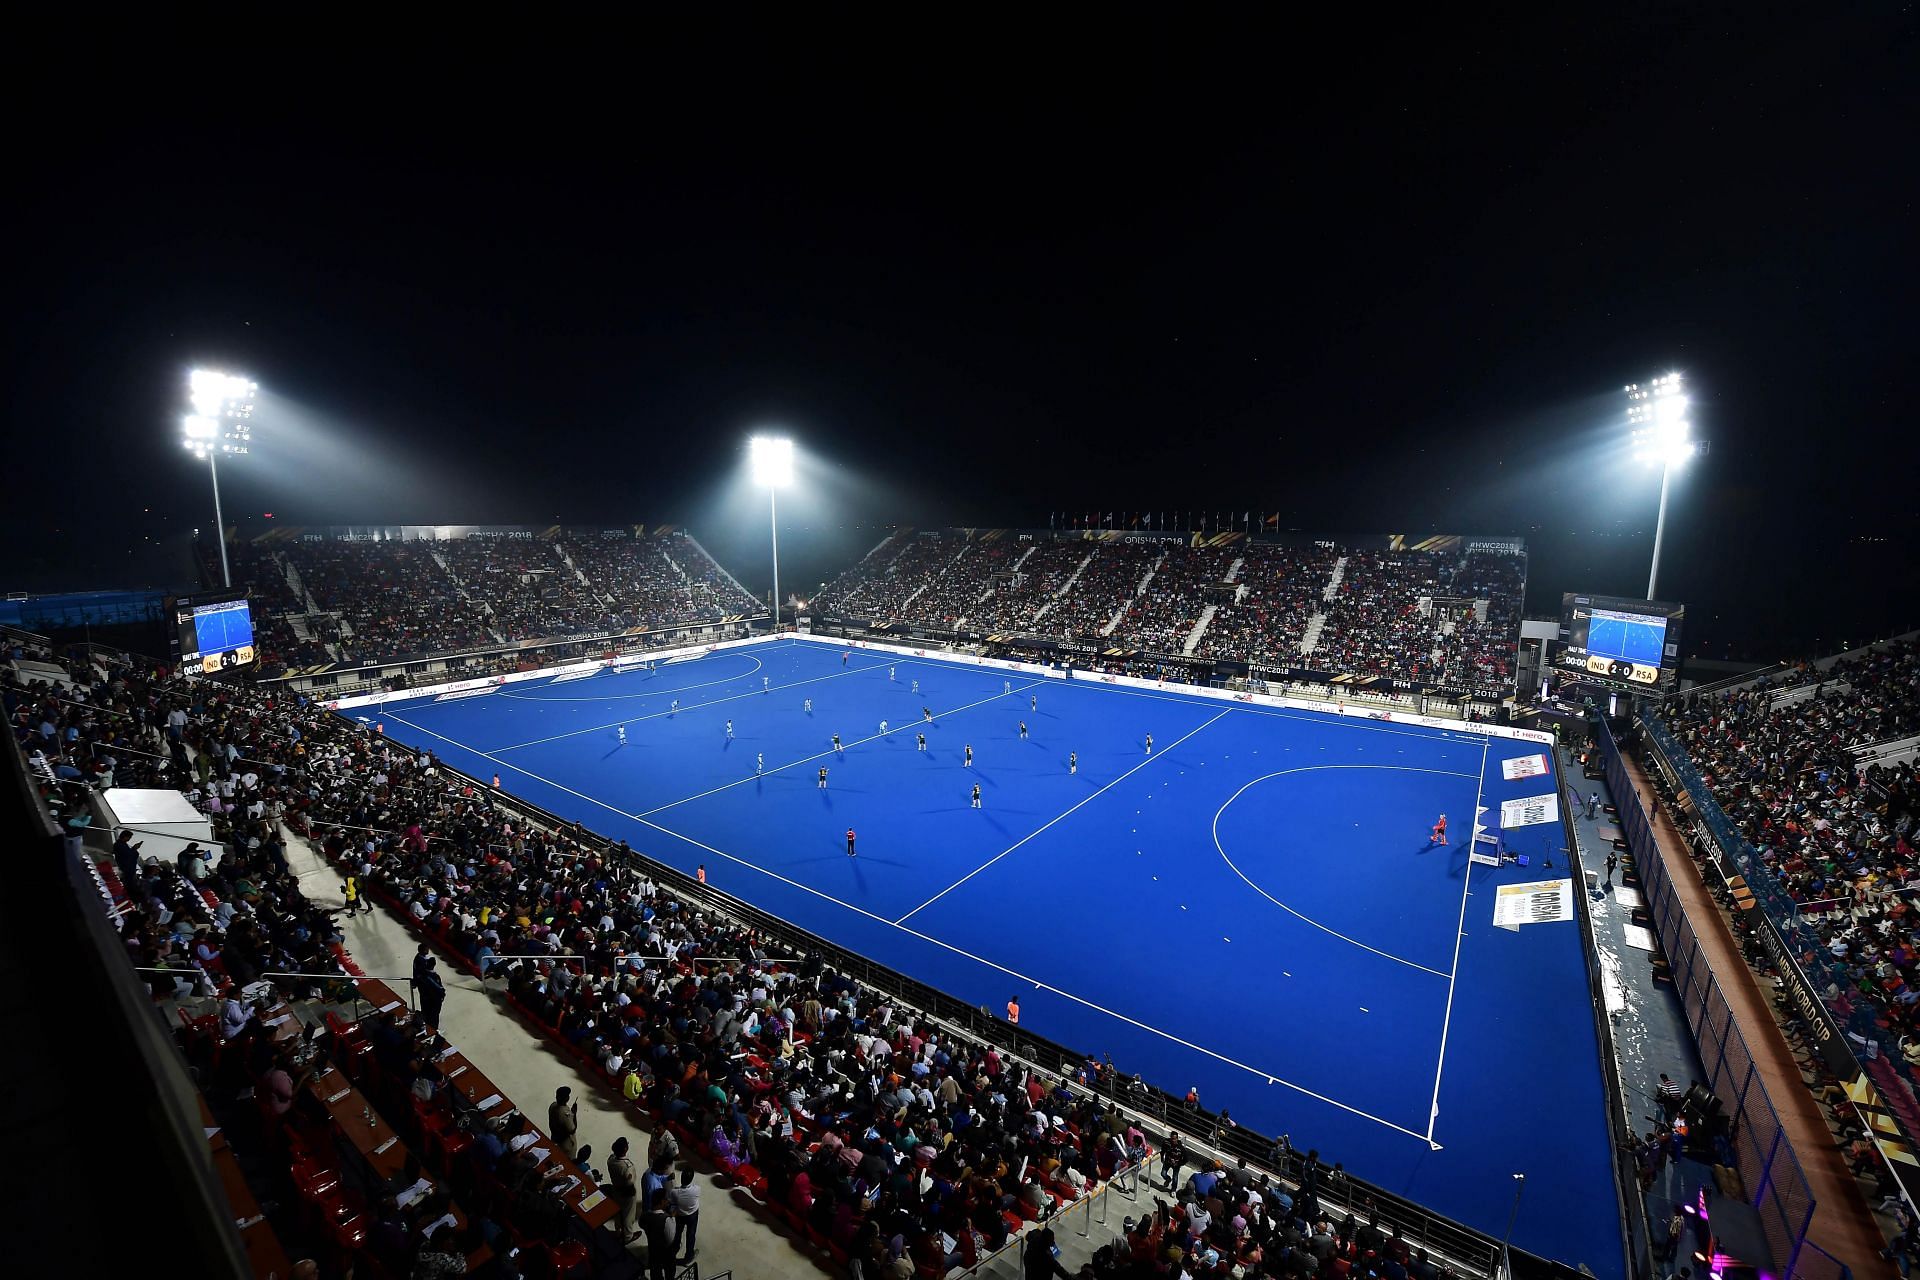 A view of the Kalinga Stadium in Bhubaneshwar. (PC: Getty Images)